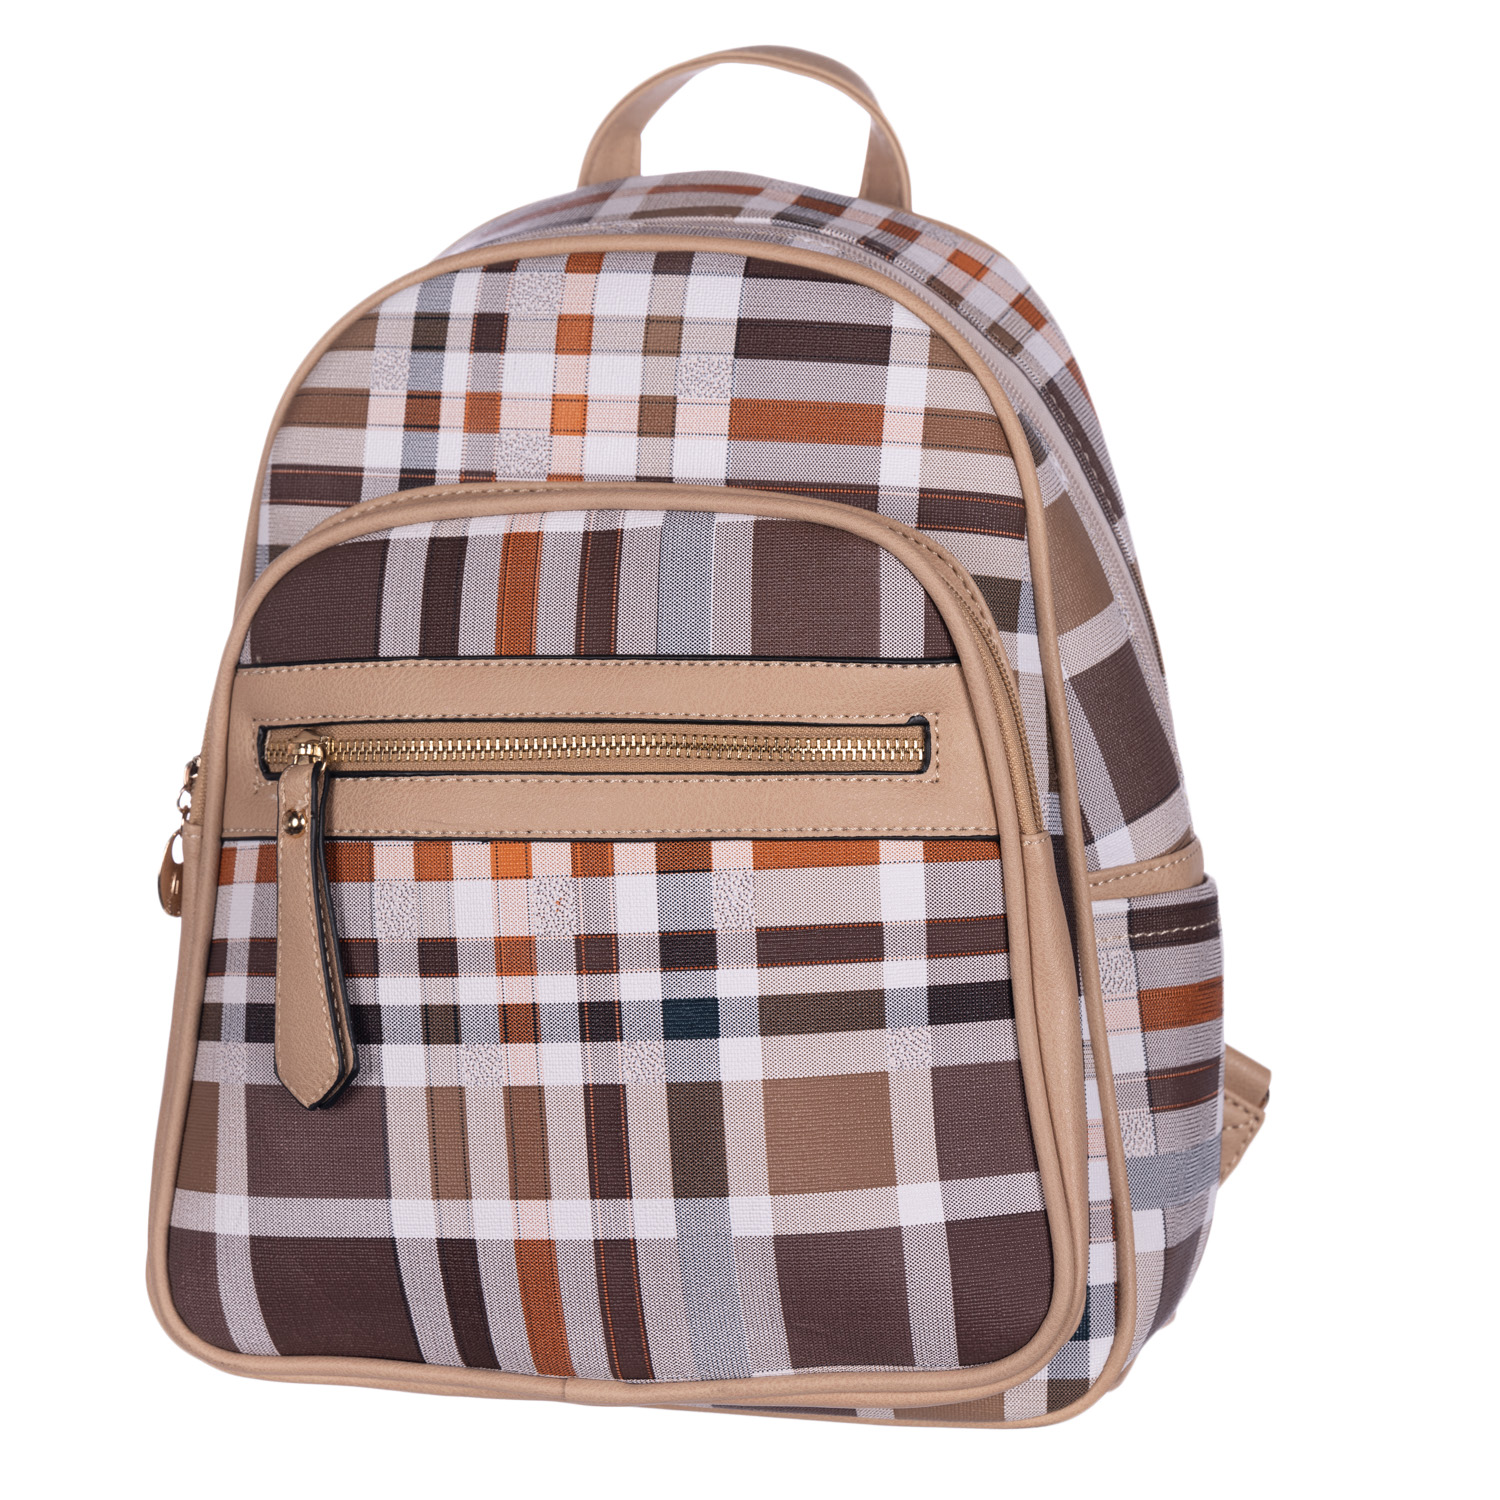 BACKPACK-B3015-TAUPE